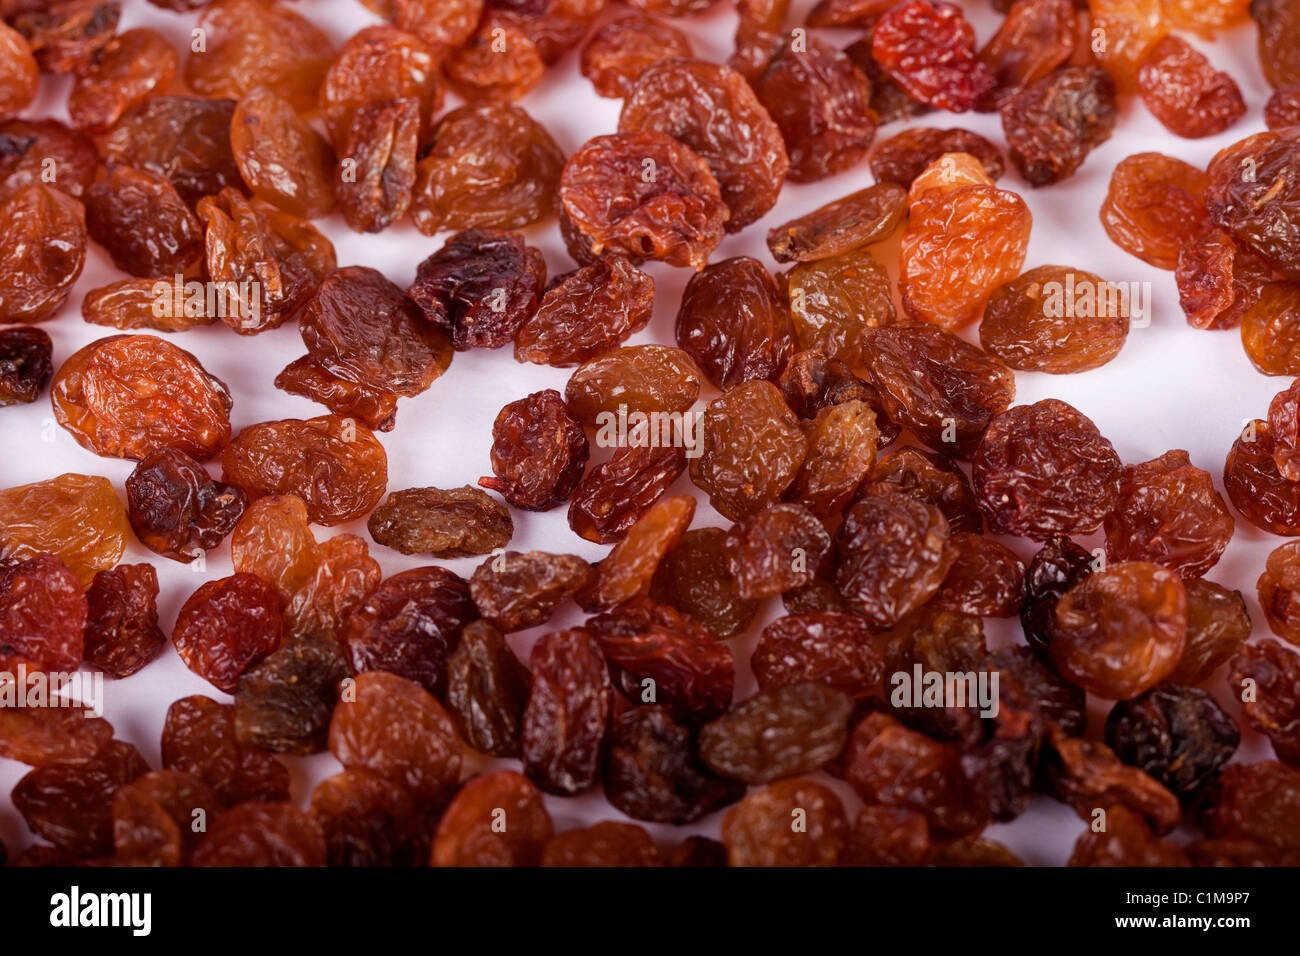 Grape Seed Stock Photos & Grape Seed Stock Images - Alamy